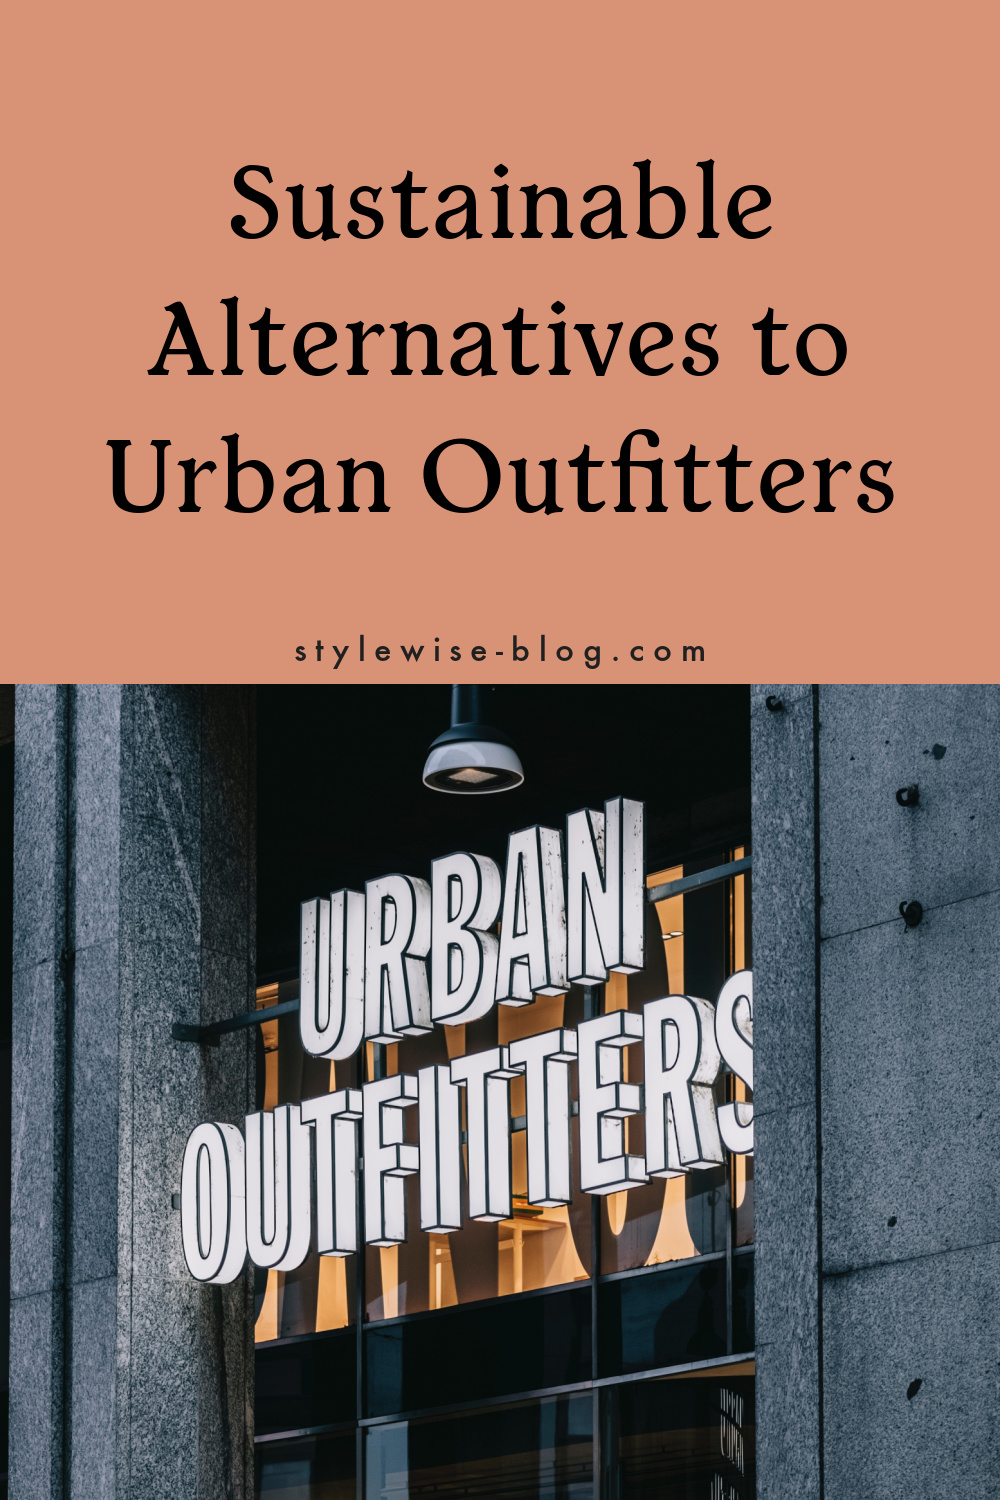 graphic with peach background and text that reads "Sustainable alternatives to Urban Outfitters - stylewise-blog.com." Bottom half of image shows storefront that reads, "Urban Outfitters"